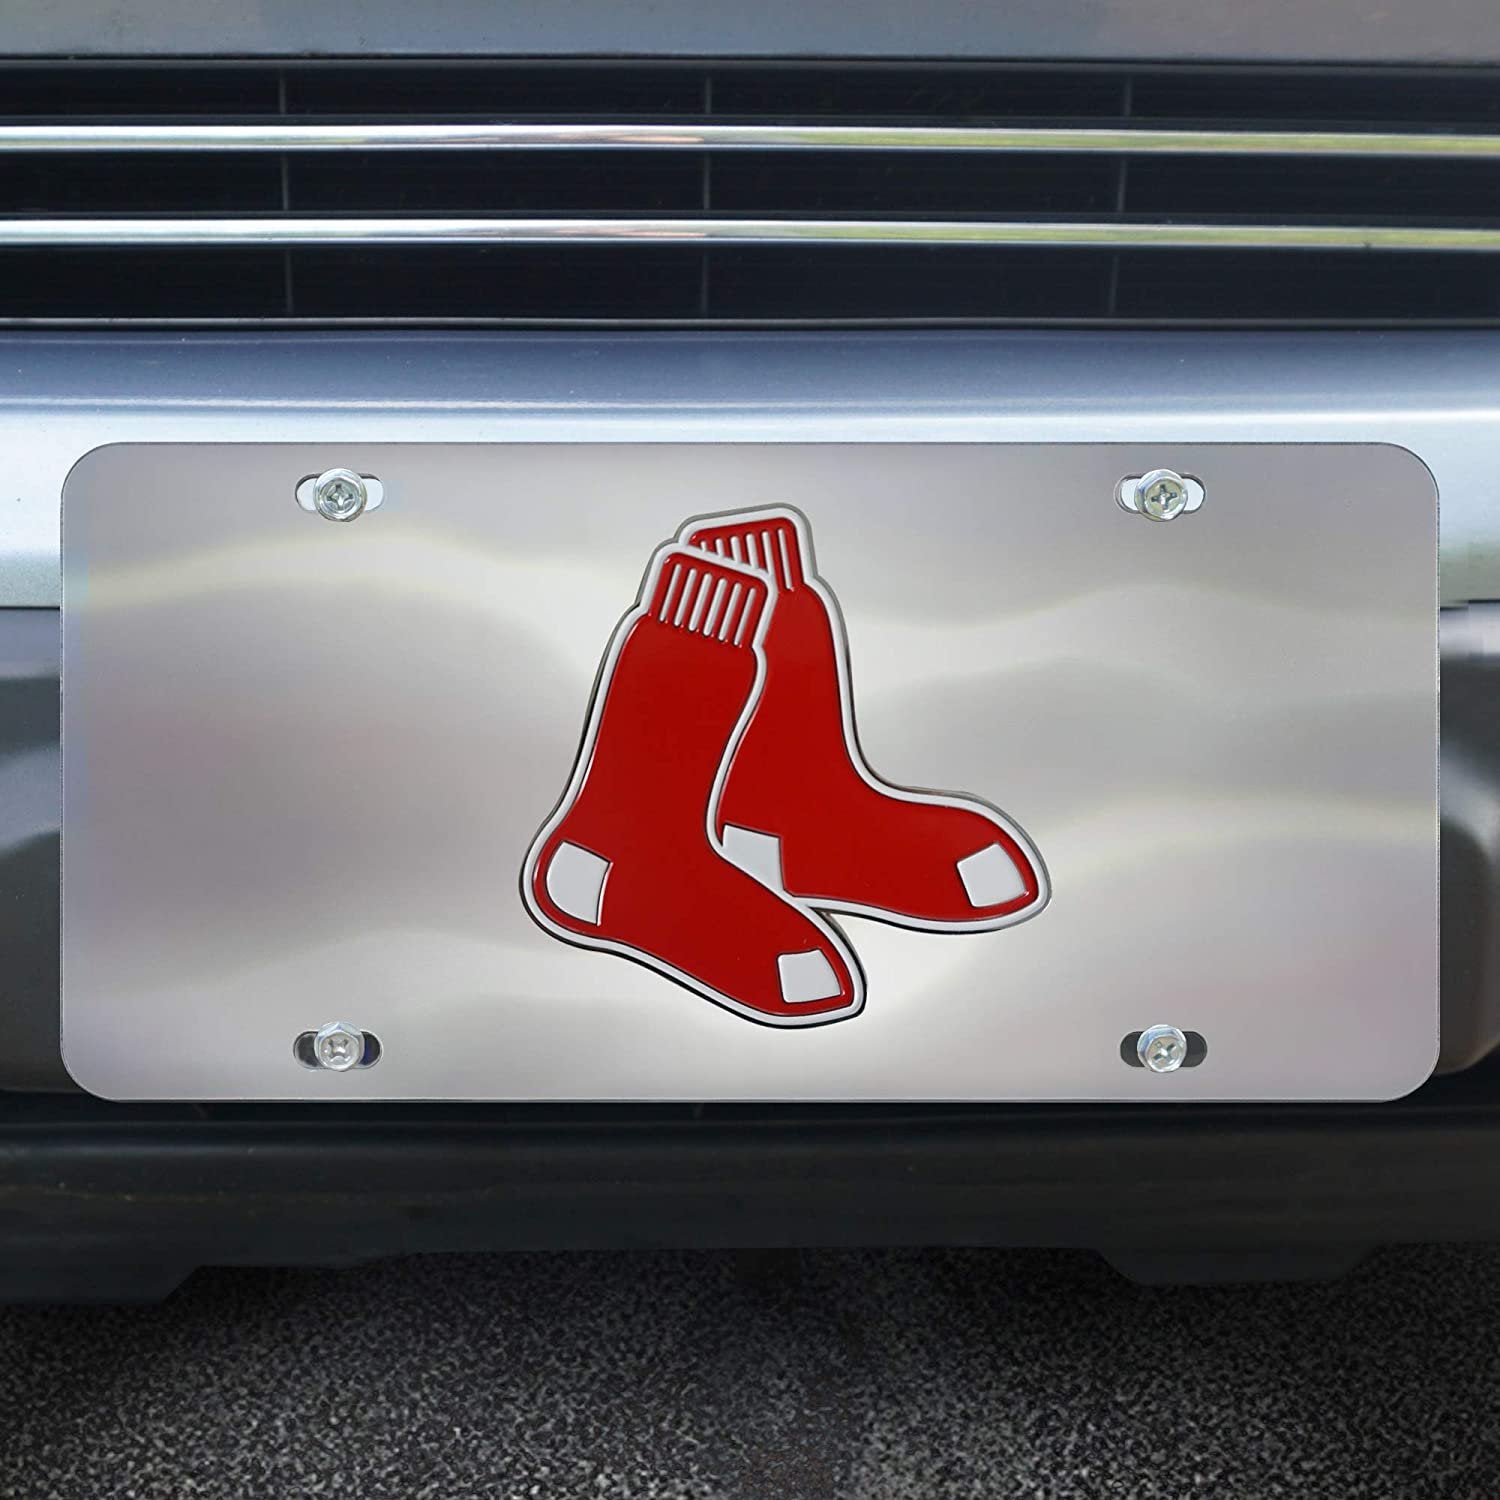 Boston Red Sox License Plate Tag, Premium Stainless Steel Diecast, Chrome, Raised Solid Metal Color Emblem, 6x12 Inch